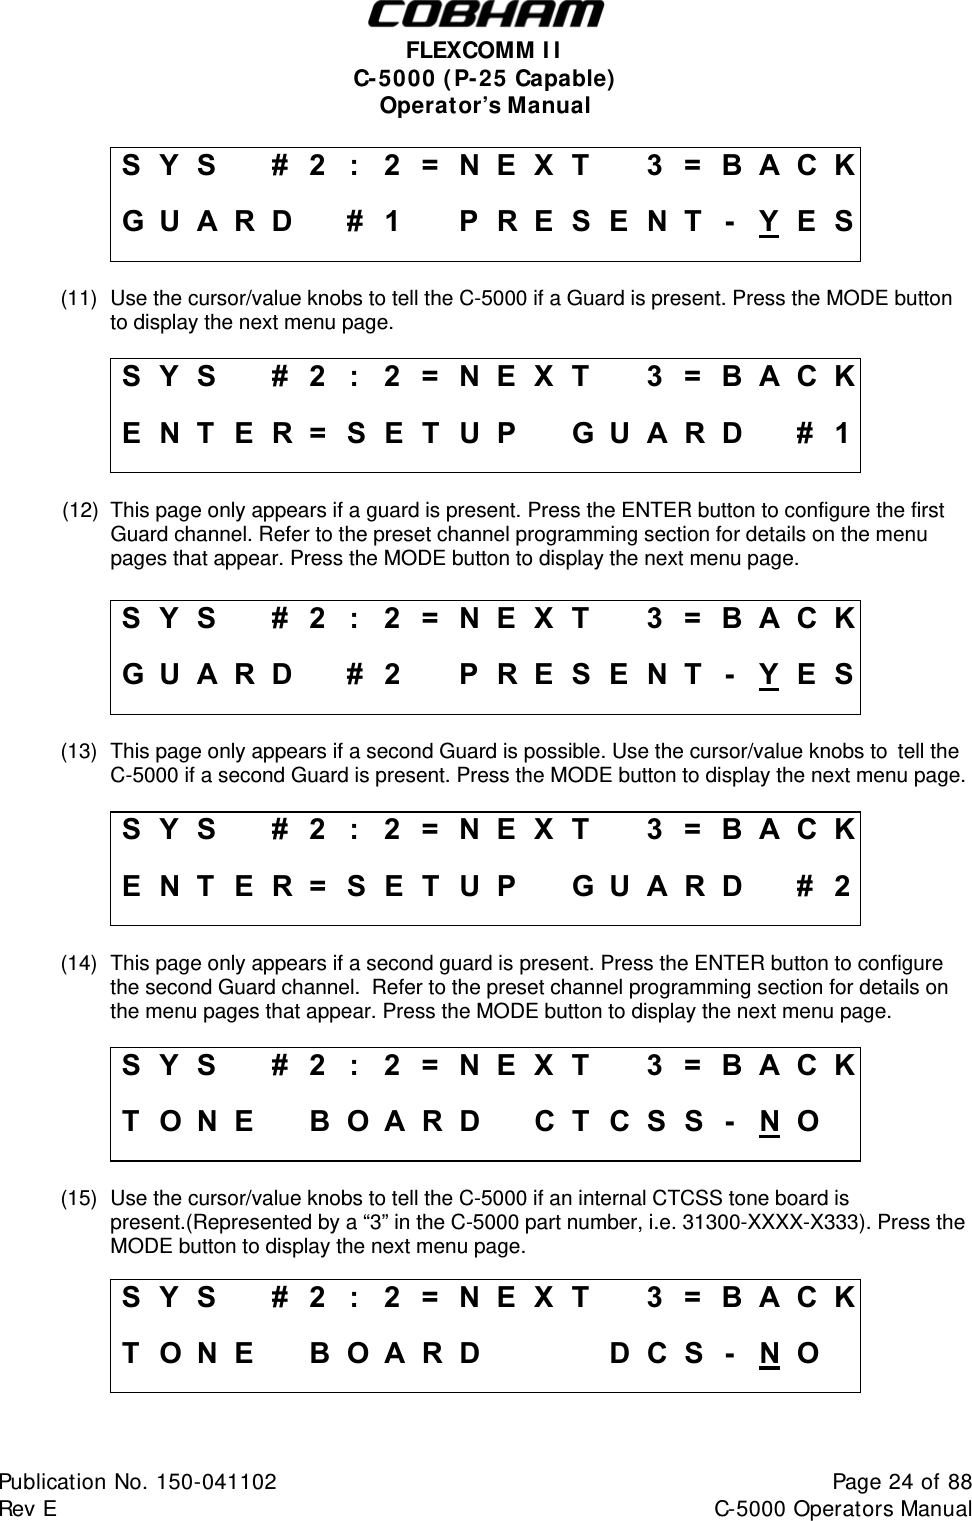  FLEXCOMM II C-5000 (P-25 Capable) Operator’s Manual S Y S    #  2  :  2 = N E X T   3 = B A C K G U A R D    #1   PRESENT - Y E S (11)  Use the cursor/value knobs to tell the C-5000 if a Guard is present. Press the MODE button to display the next menu page.  S Y S    #  2  :  2 = N E X T   3 = B A C K E N T E R = SET UP   GUARD    # 1 (12)  This page only appears if a guard is present. Press the ENTER button to configure the first Guard channel. Refer to the preset channel programming section for details on the menu pages that appear. Press the MODE button to display the next menu page.  S Y S    #  2  :  2 = N E X T   3 = B A C K G U A R D    #2   PRESENT - Y E S (13)  This page only appears if a second Guard is possible. Use the cursor/value knobs to  tell the C-5000 if a second Guard is present. Press the MODE button to display the next menu page.  S Y S    #  2  :  2 = N E X T   3 = B A C K E N T E R = SET UP   GUARD    # 2 (14)  This page only appears if a second guard is present. Press the ENTER button to configure the second Guard channel.  Refer to the preset channel programming section for details on the menu pages that appear. Press the MODE button to display the next menu page.  S Y S    #  2  :  2 = N E X T   3 = B A C K T O N E    B OARD   CT CSS - N O   (15)  Use the cursor/value knobs to tell the C-5000 if an internal CTCSS tone board is present.(Represented by a “3” in the C-5000 part number, i.e. 31300-XXXX-X333). Press the MODE button to display the next menu page. S Y S    #  2  :  2 = N E X T   3 = B A C K T O N E    B OARD       DCS - N O      Publication No. 150-041102  Page 24 of 88  Rev E  C-5000 Operators Manual    